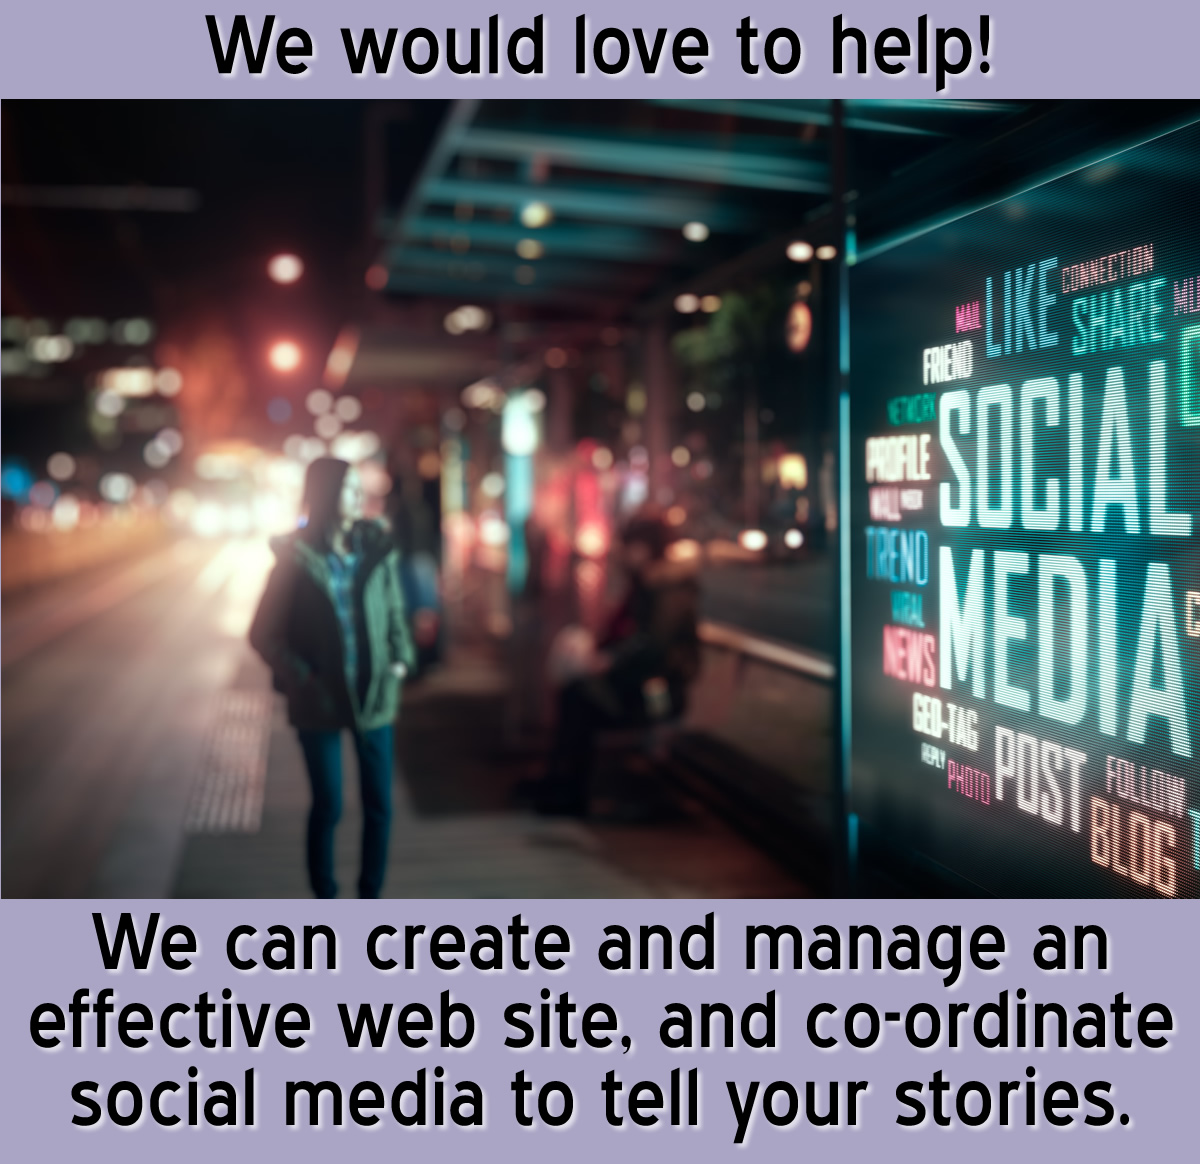 We can create and manage an effective web site, and co-ordinate social media to tell your stories.